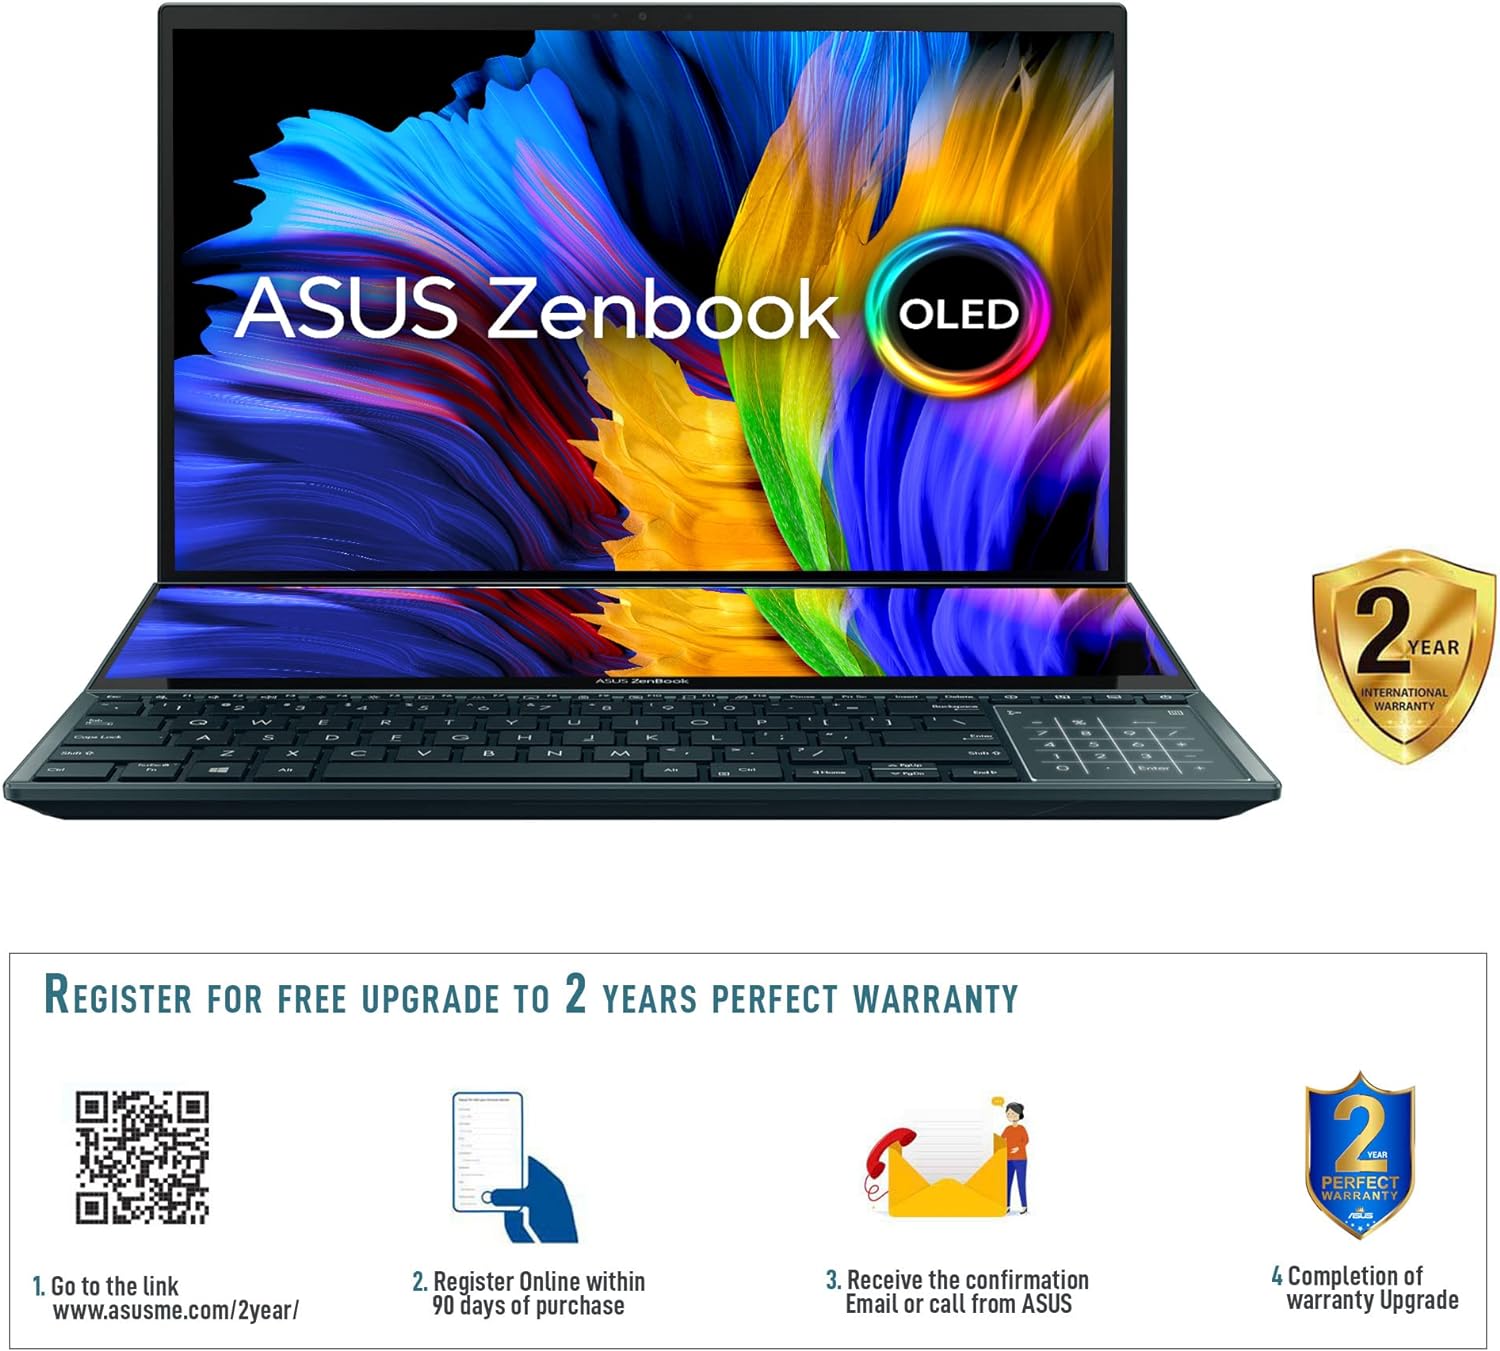 ASUS Zenbook Pro Duo 15 OLED Laptop with Core i9 Processor and NVIDIA RTX 3070 - Blue 0195553840903